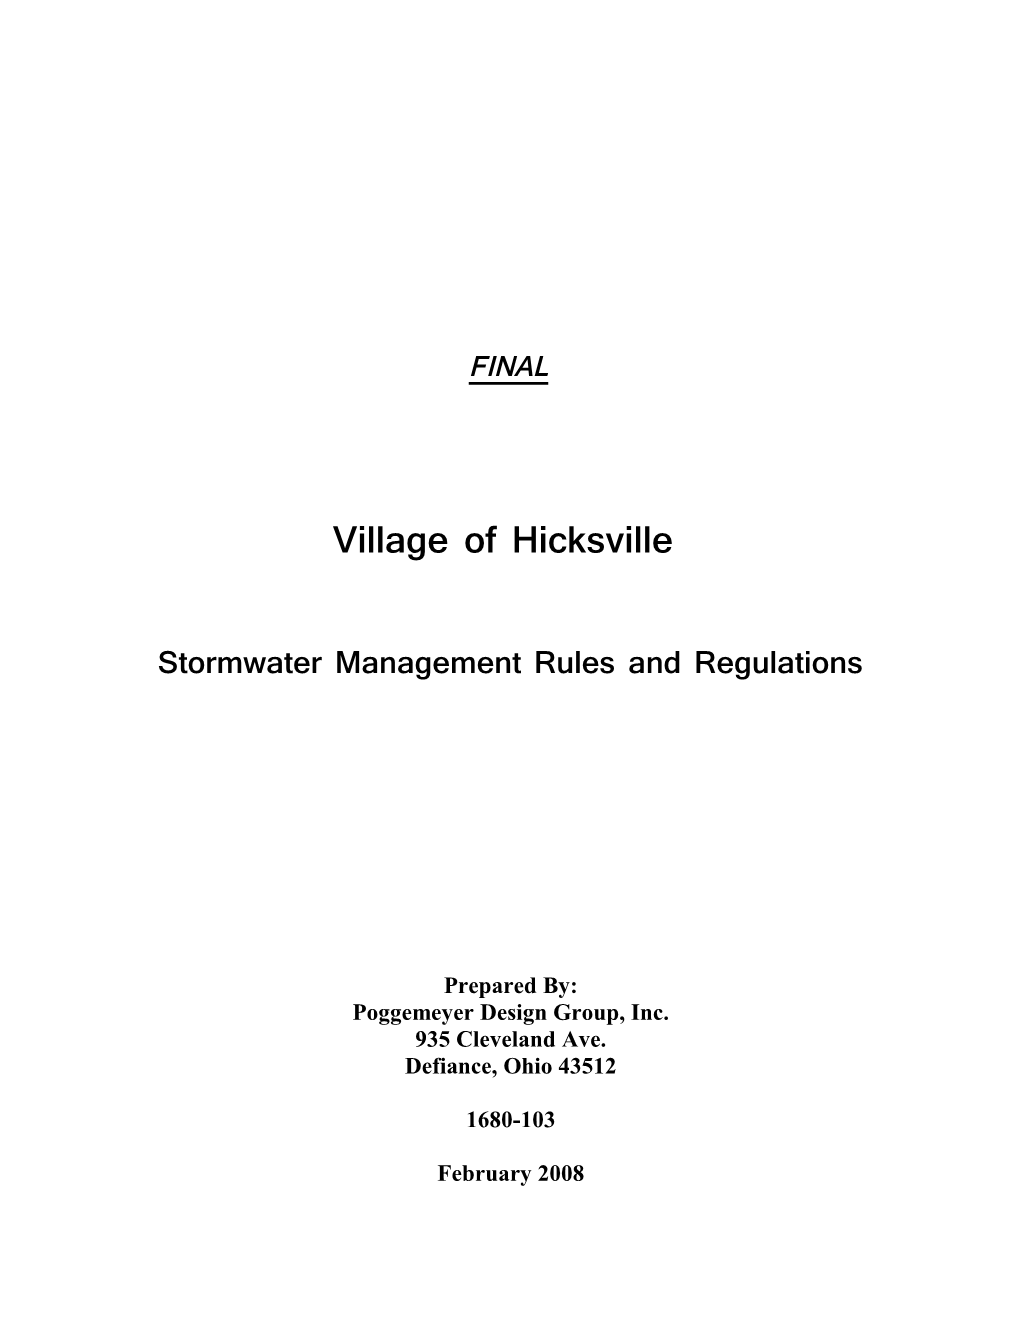 Stormwater Management Rules and Regulations